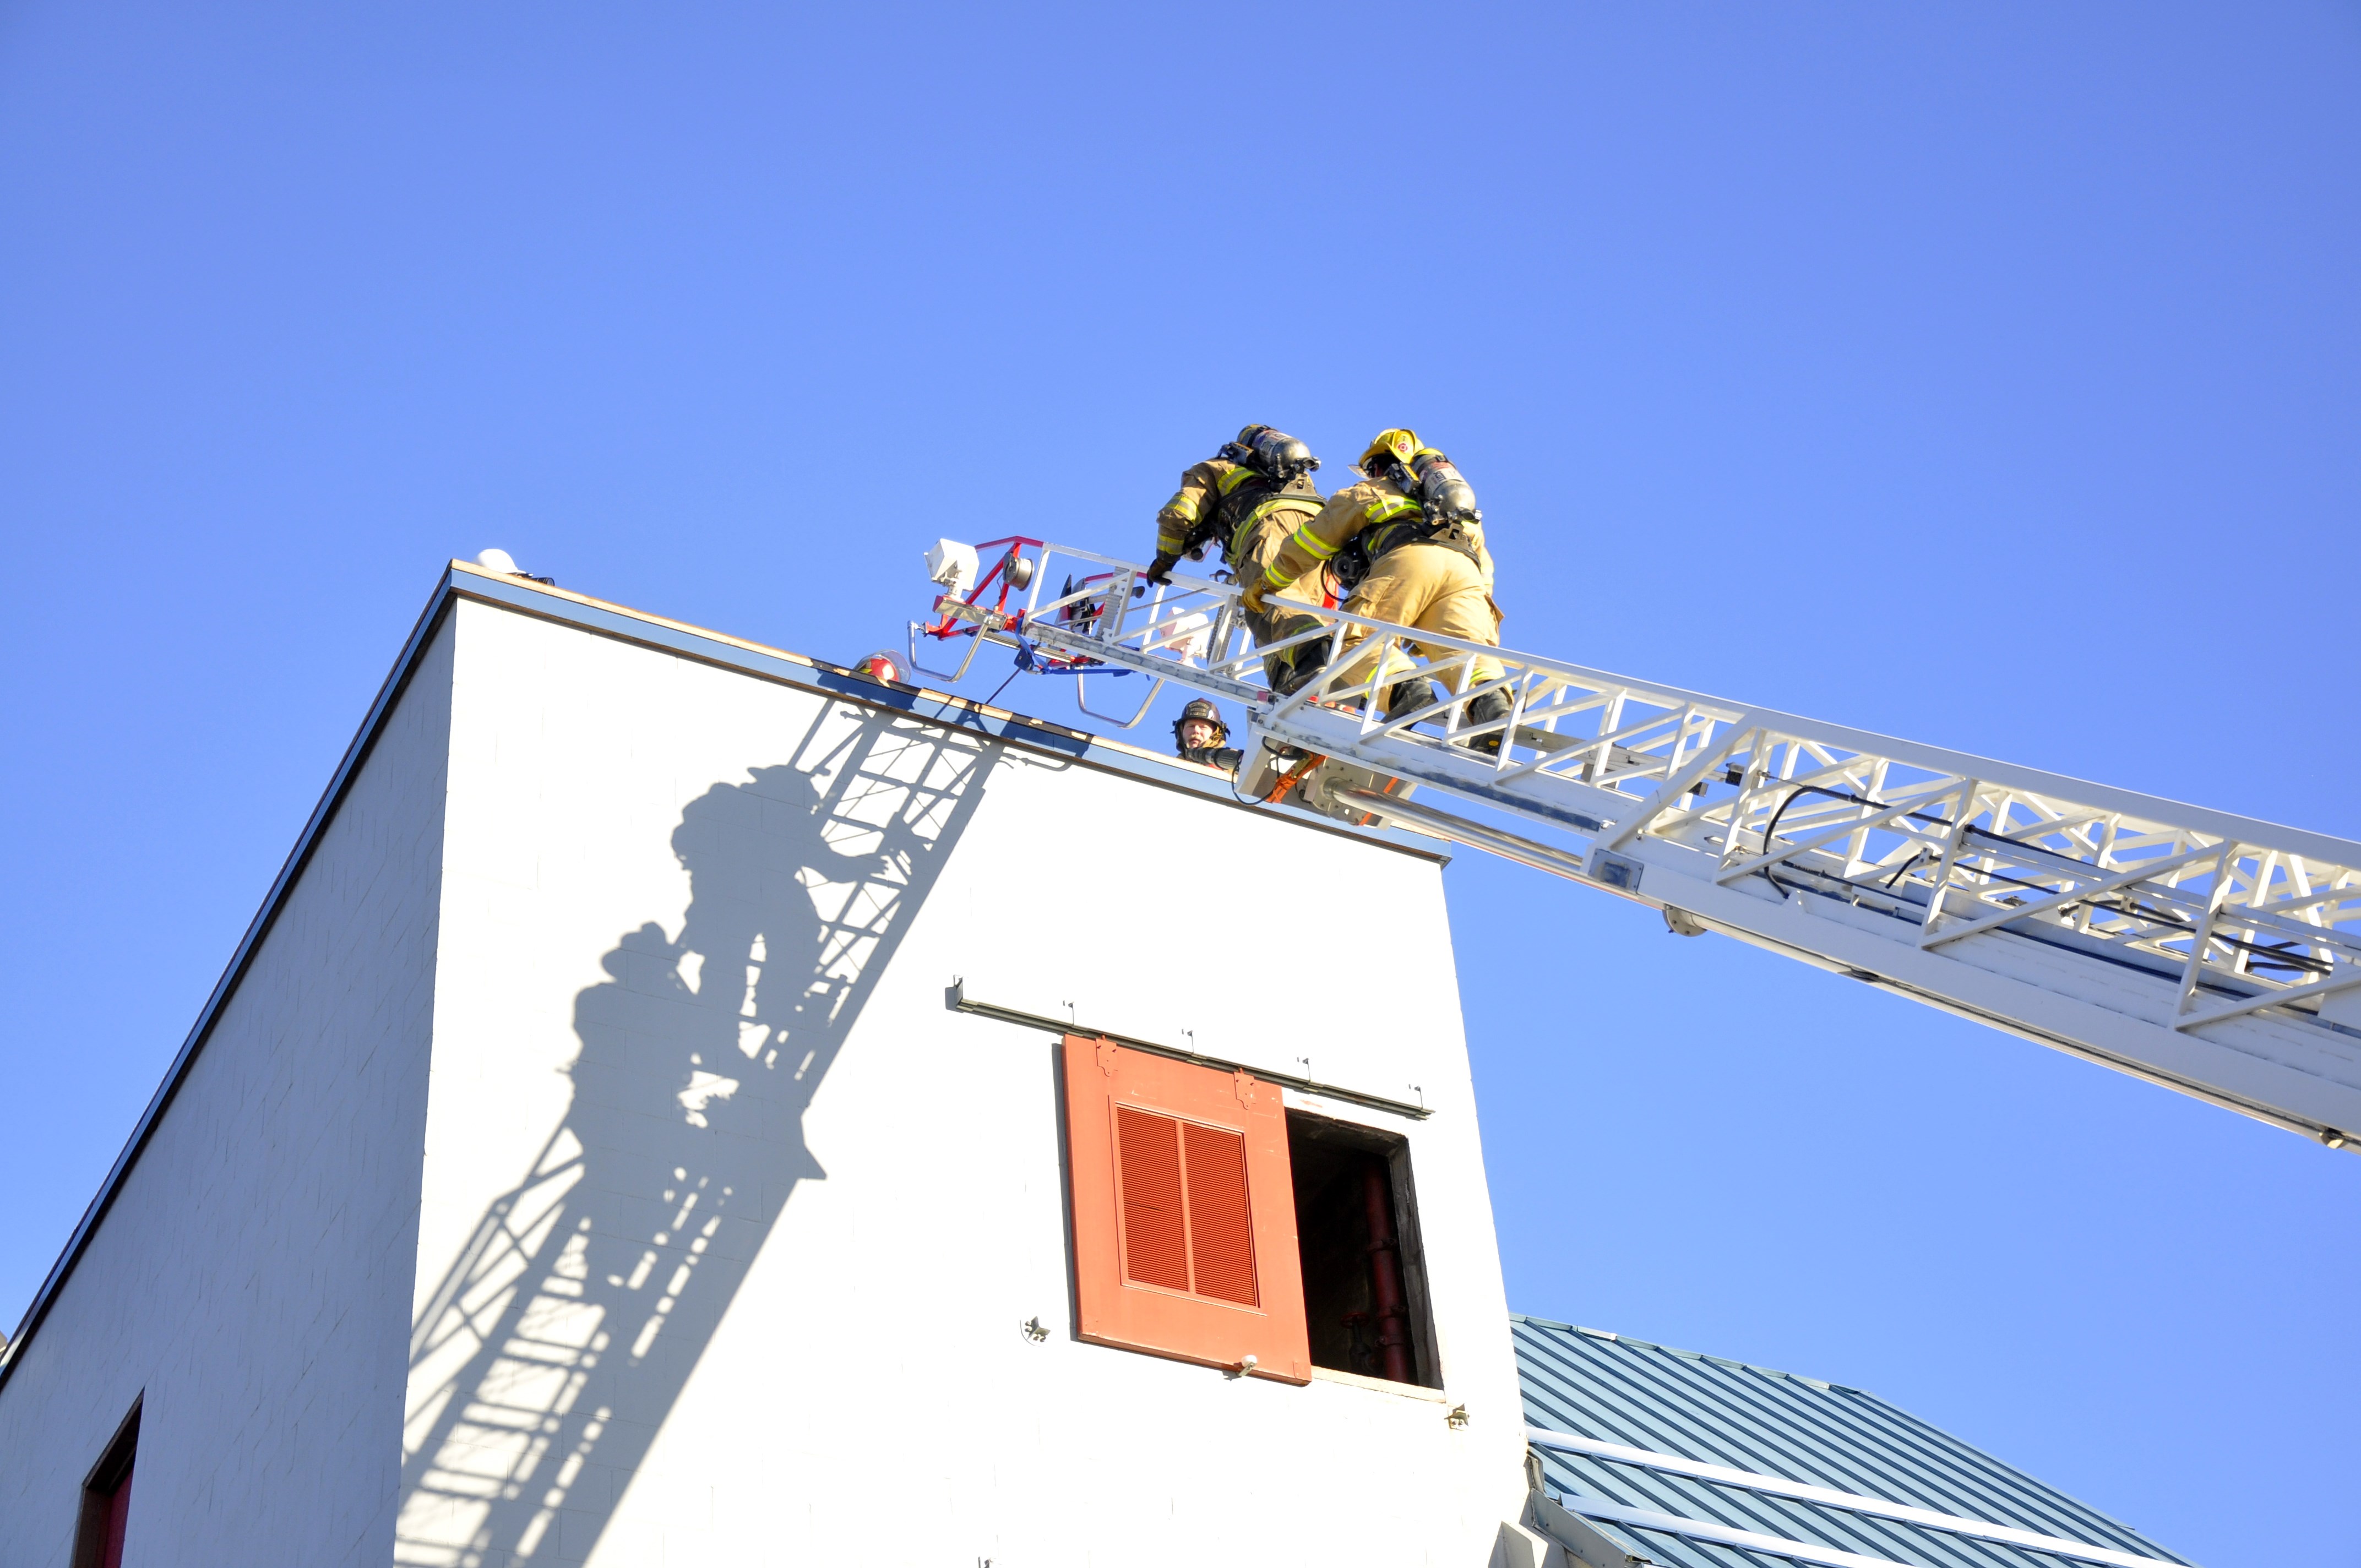 KTOO reporter Matt Miller climbs to the top of the ladder with his "shadow" firefighter Erik Goldsberry. Photo by Annie Bartholomew/KTOO